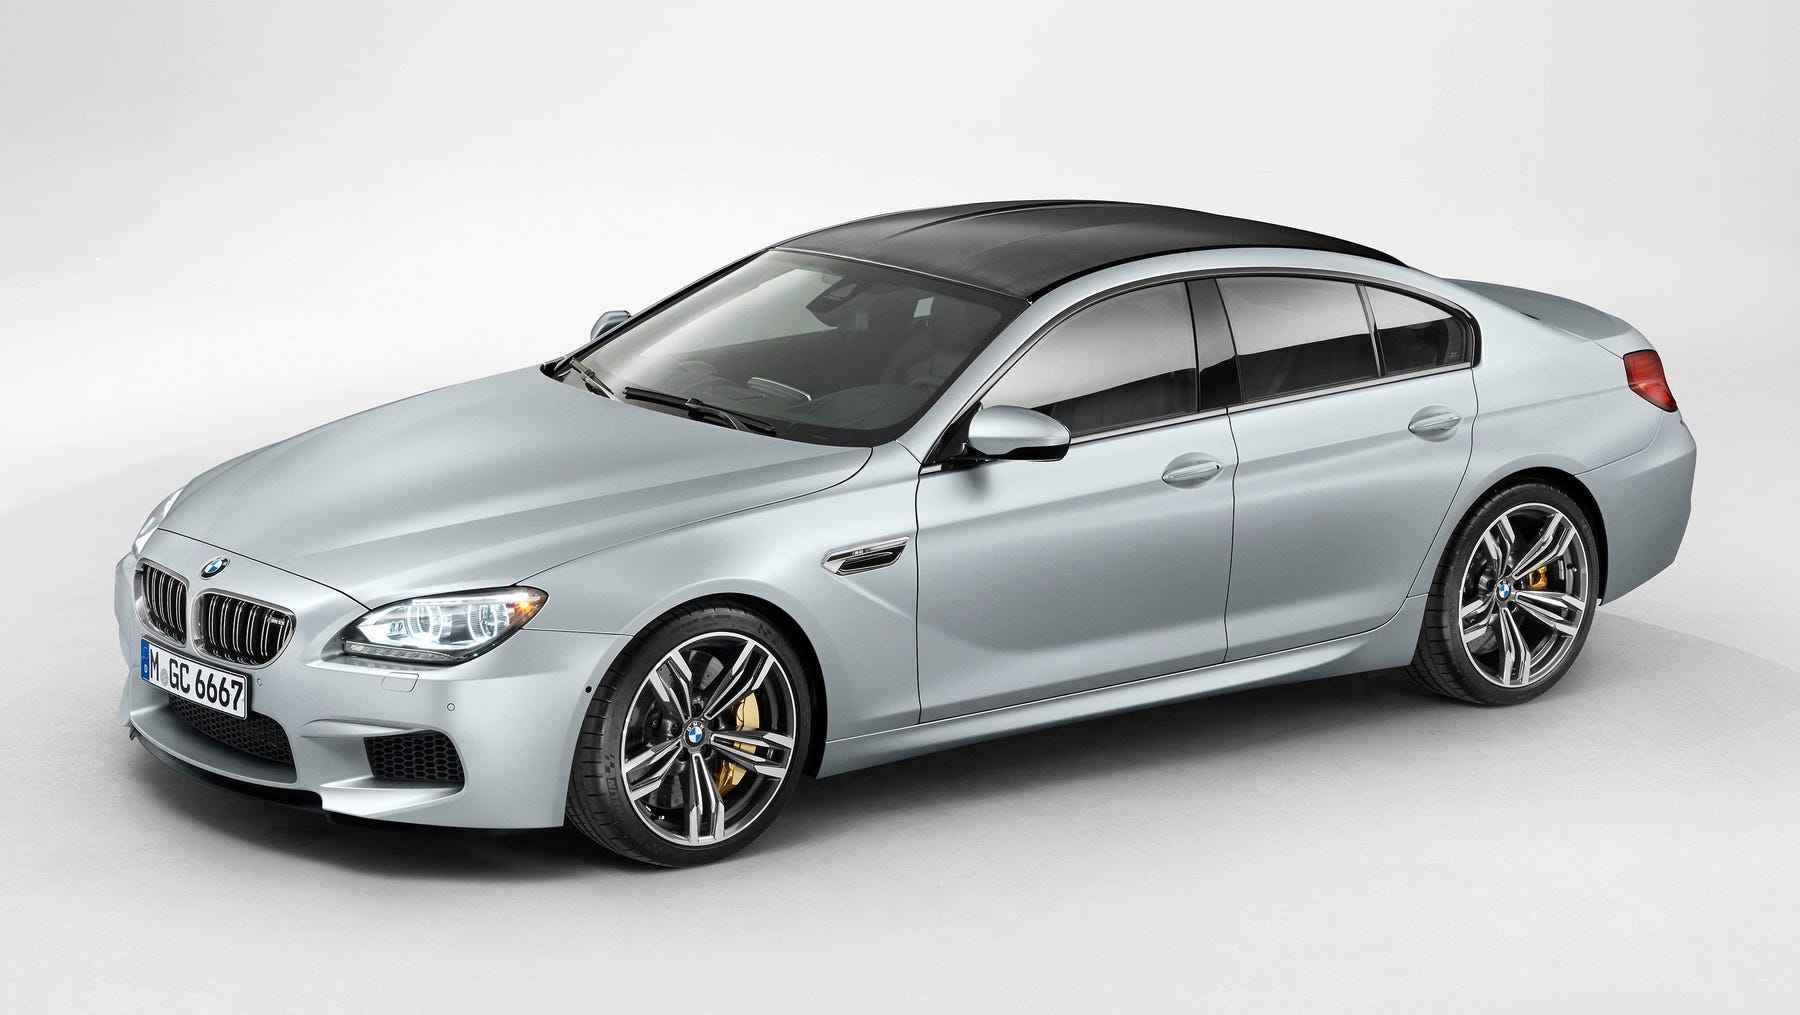 2014 BMW M6 Gran Coupe blends styling, performance